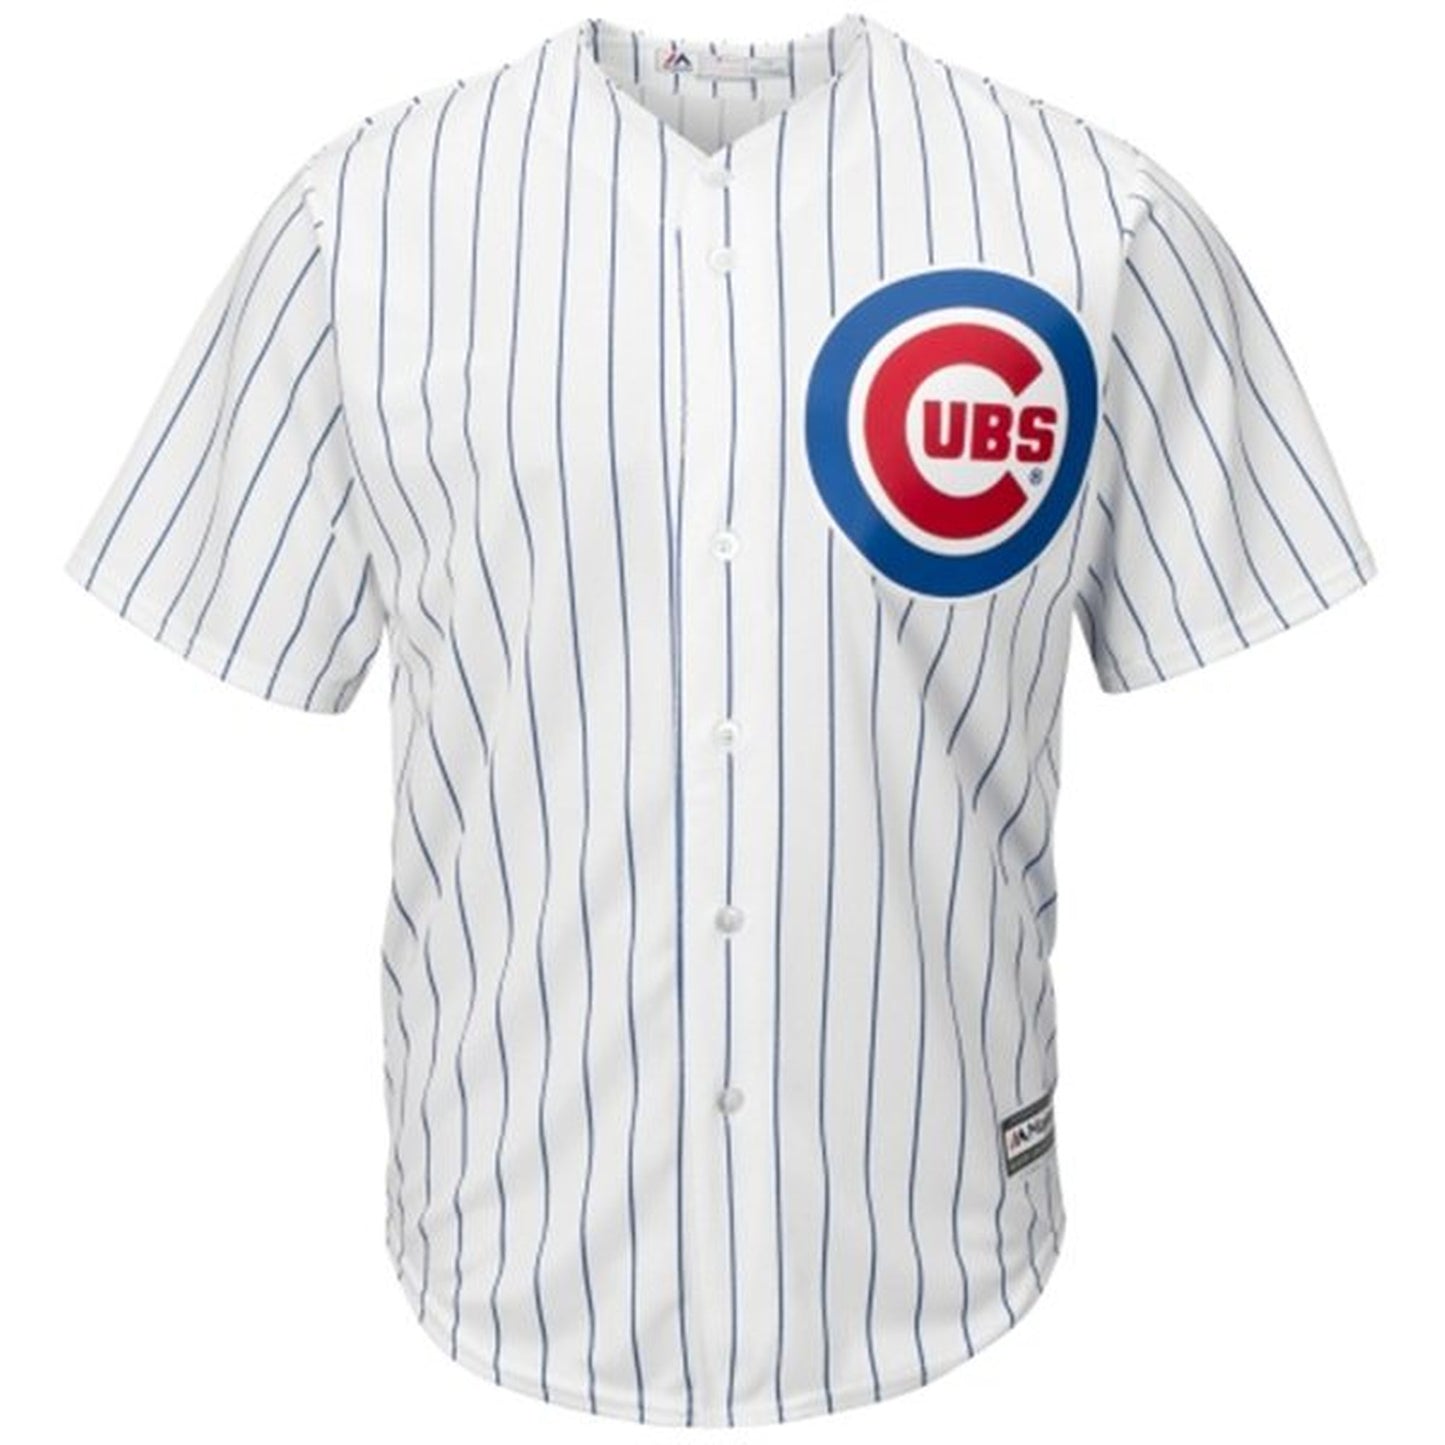 Kris Bryant Chicago Cubs Youth Home Stitched Replica Jersey